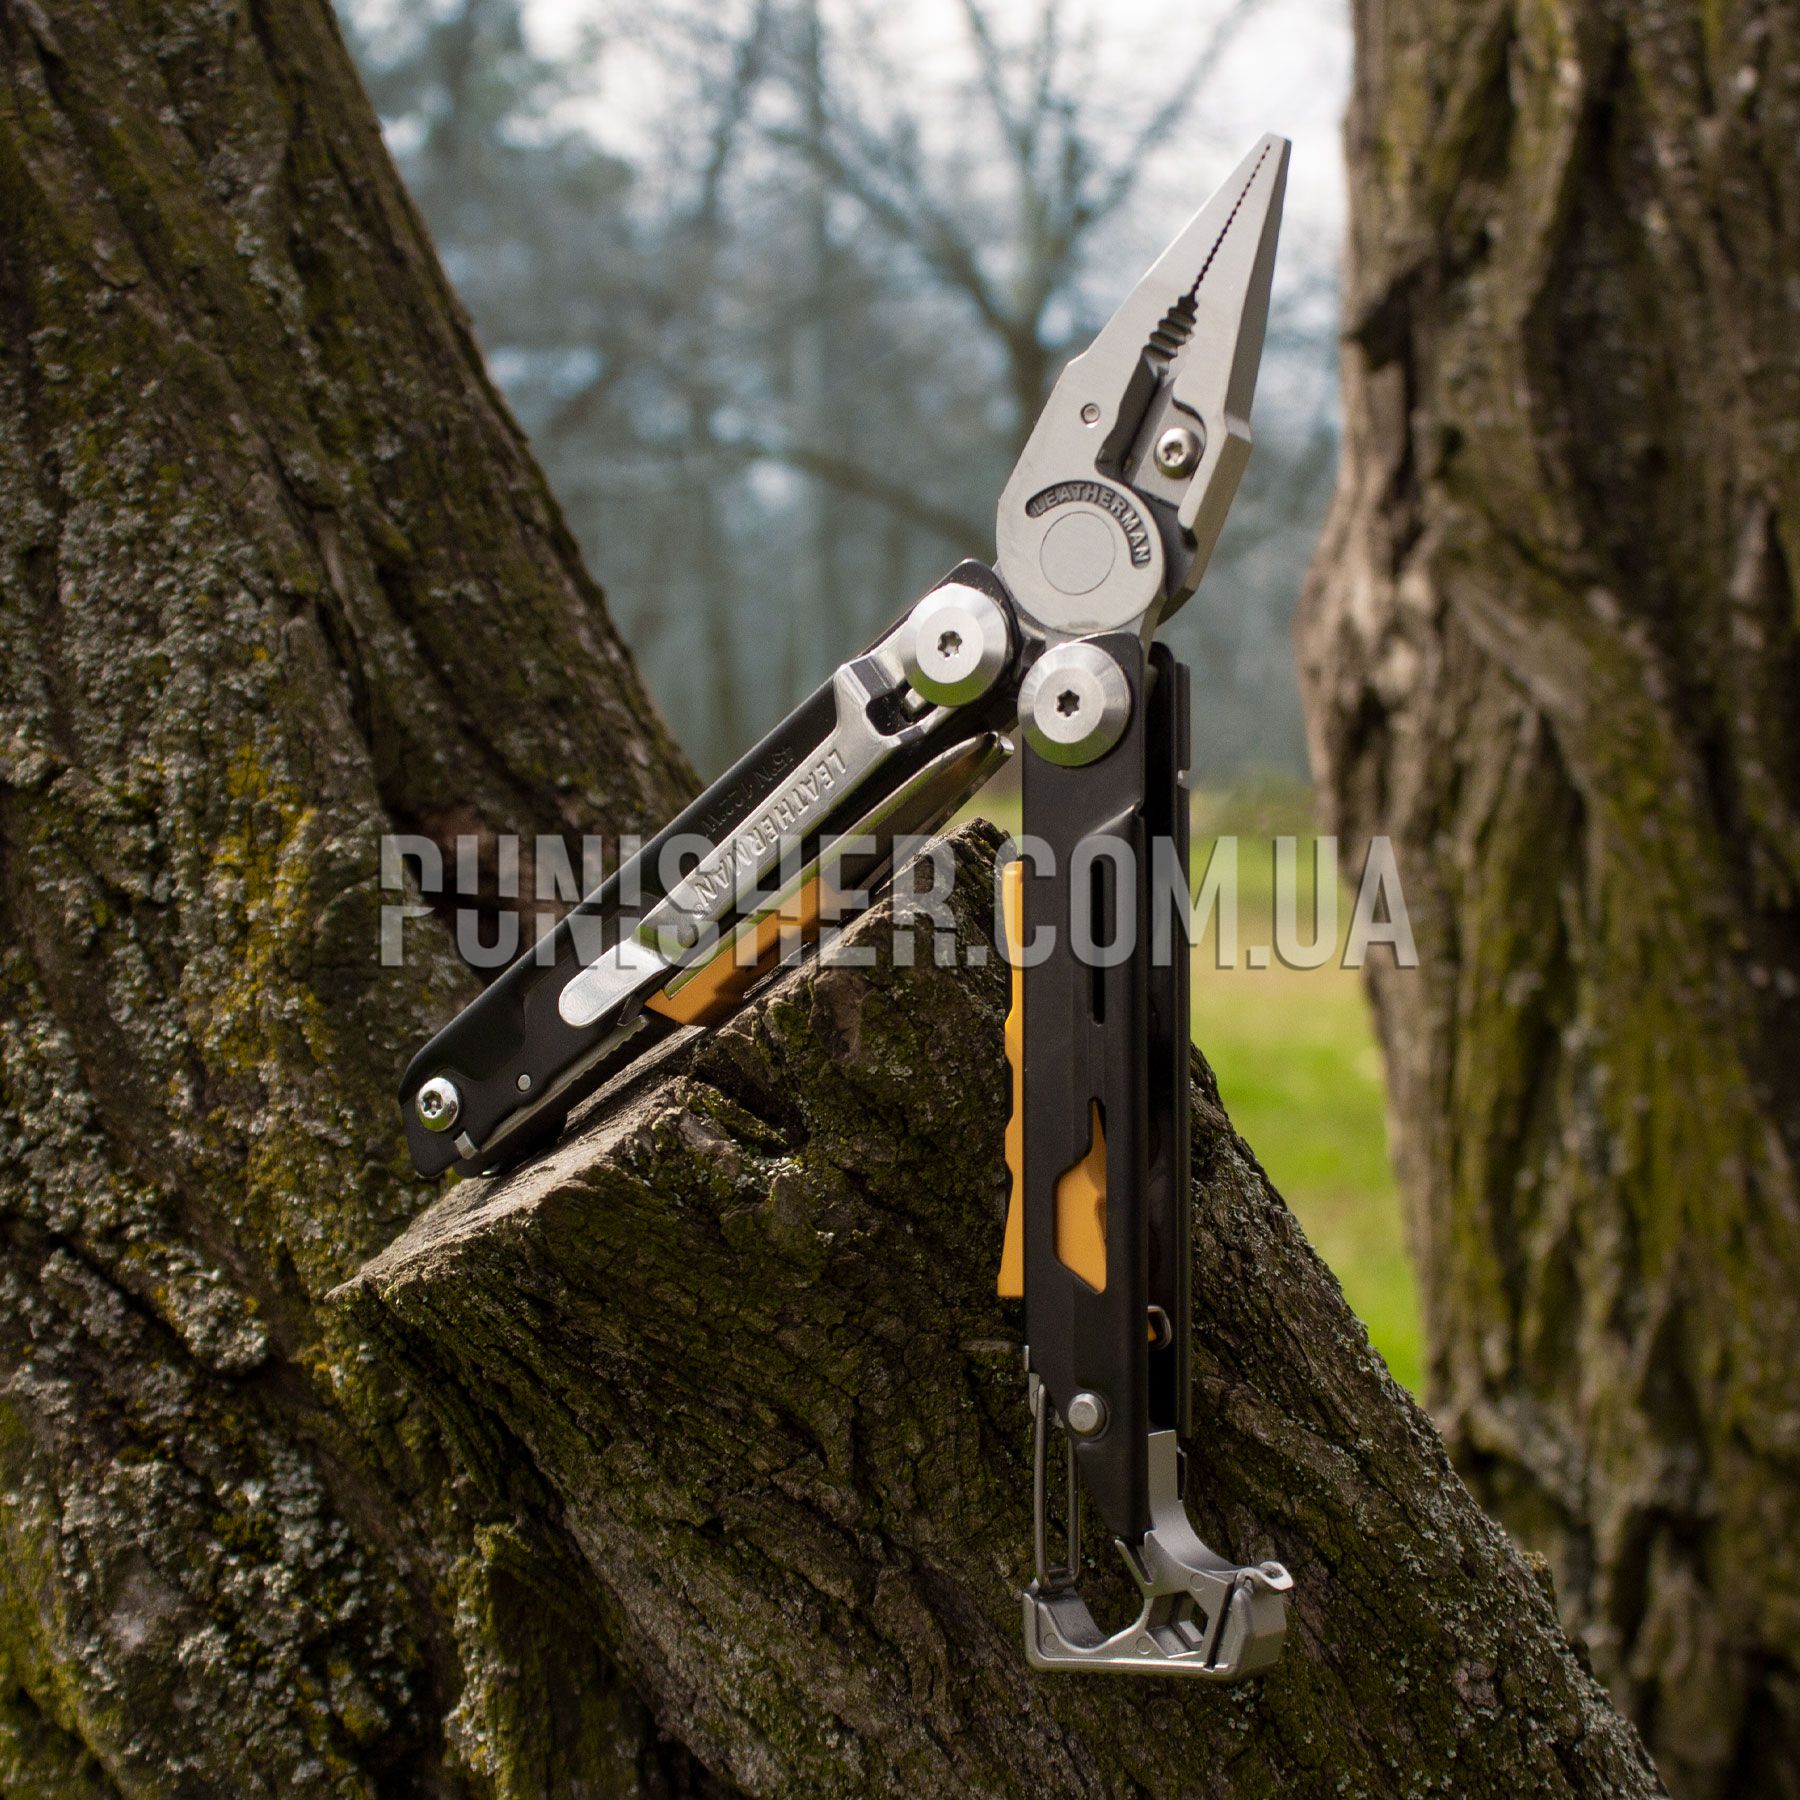 Leatherman Signal Multitool Silver buy with international delivery ...